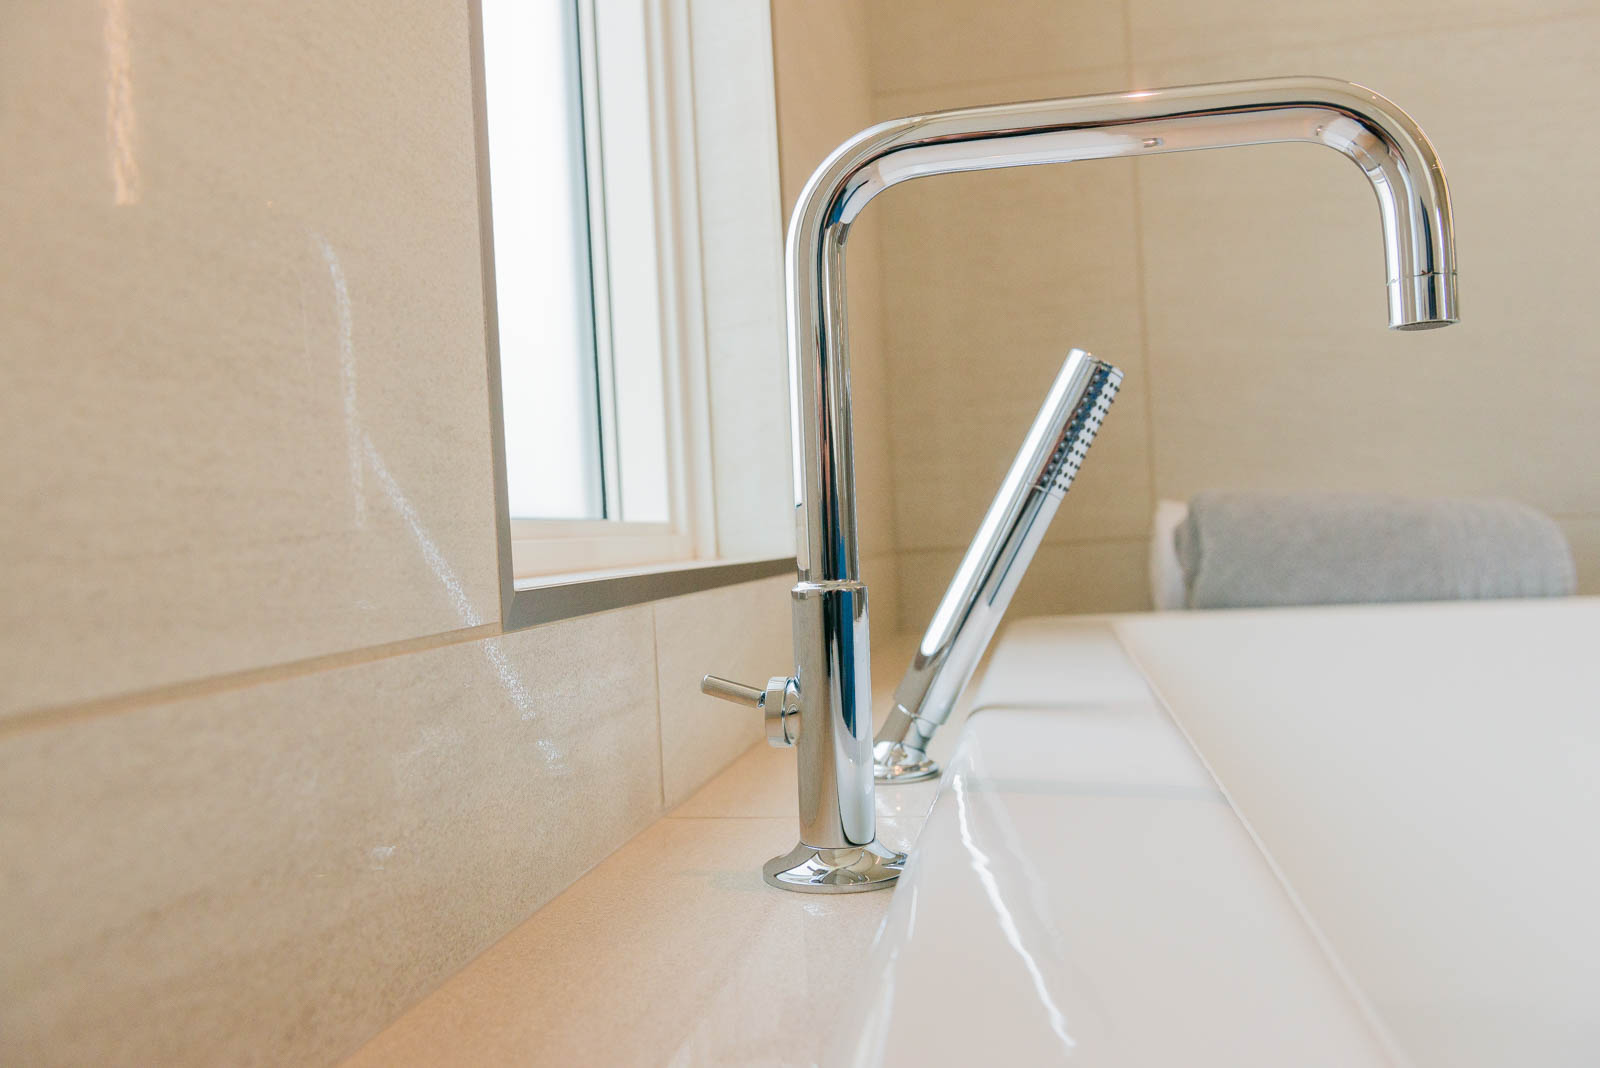 Luxury kitchen and bathroom plumbing fixtures provide the finishing touch - Oxford Plumbing